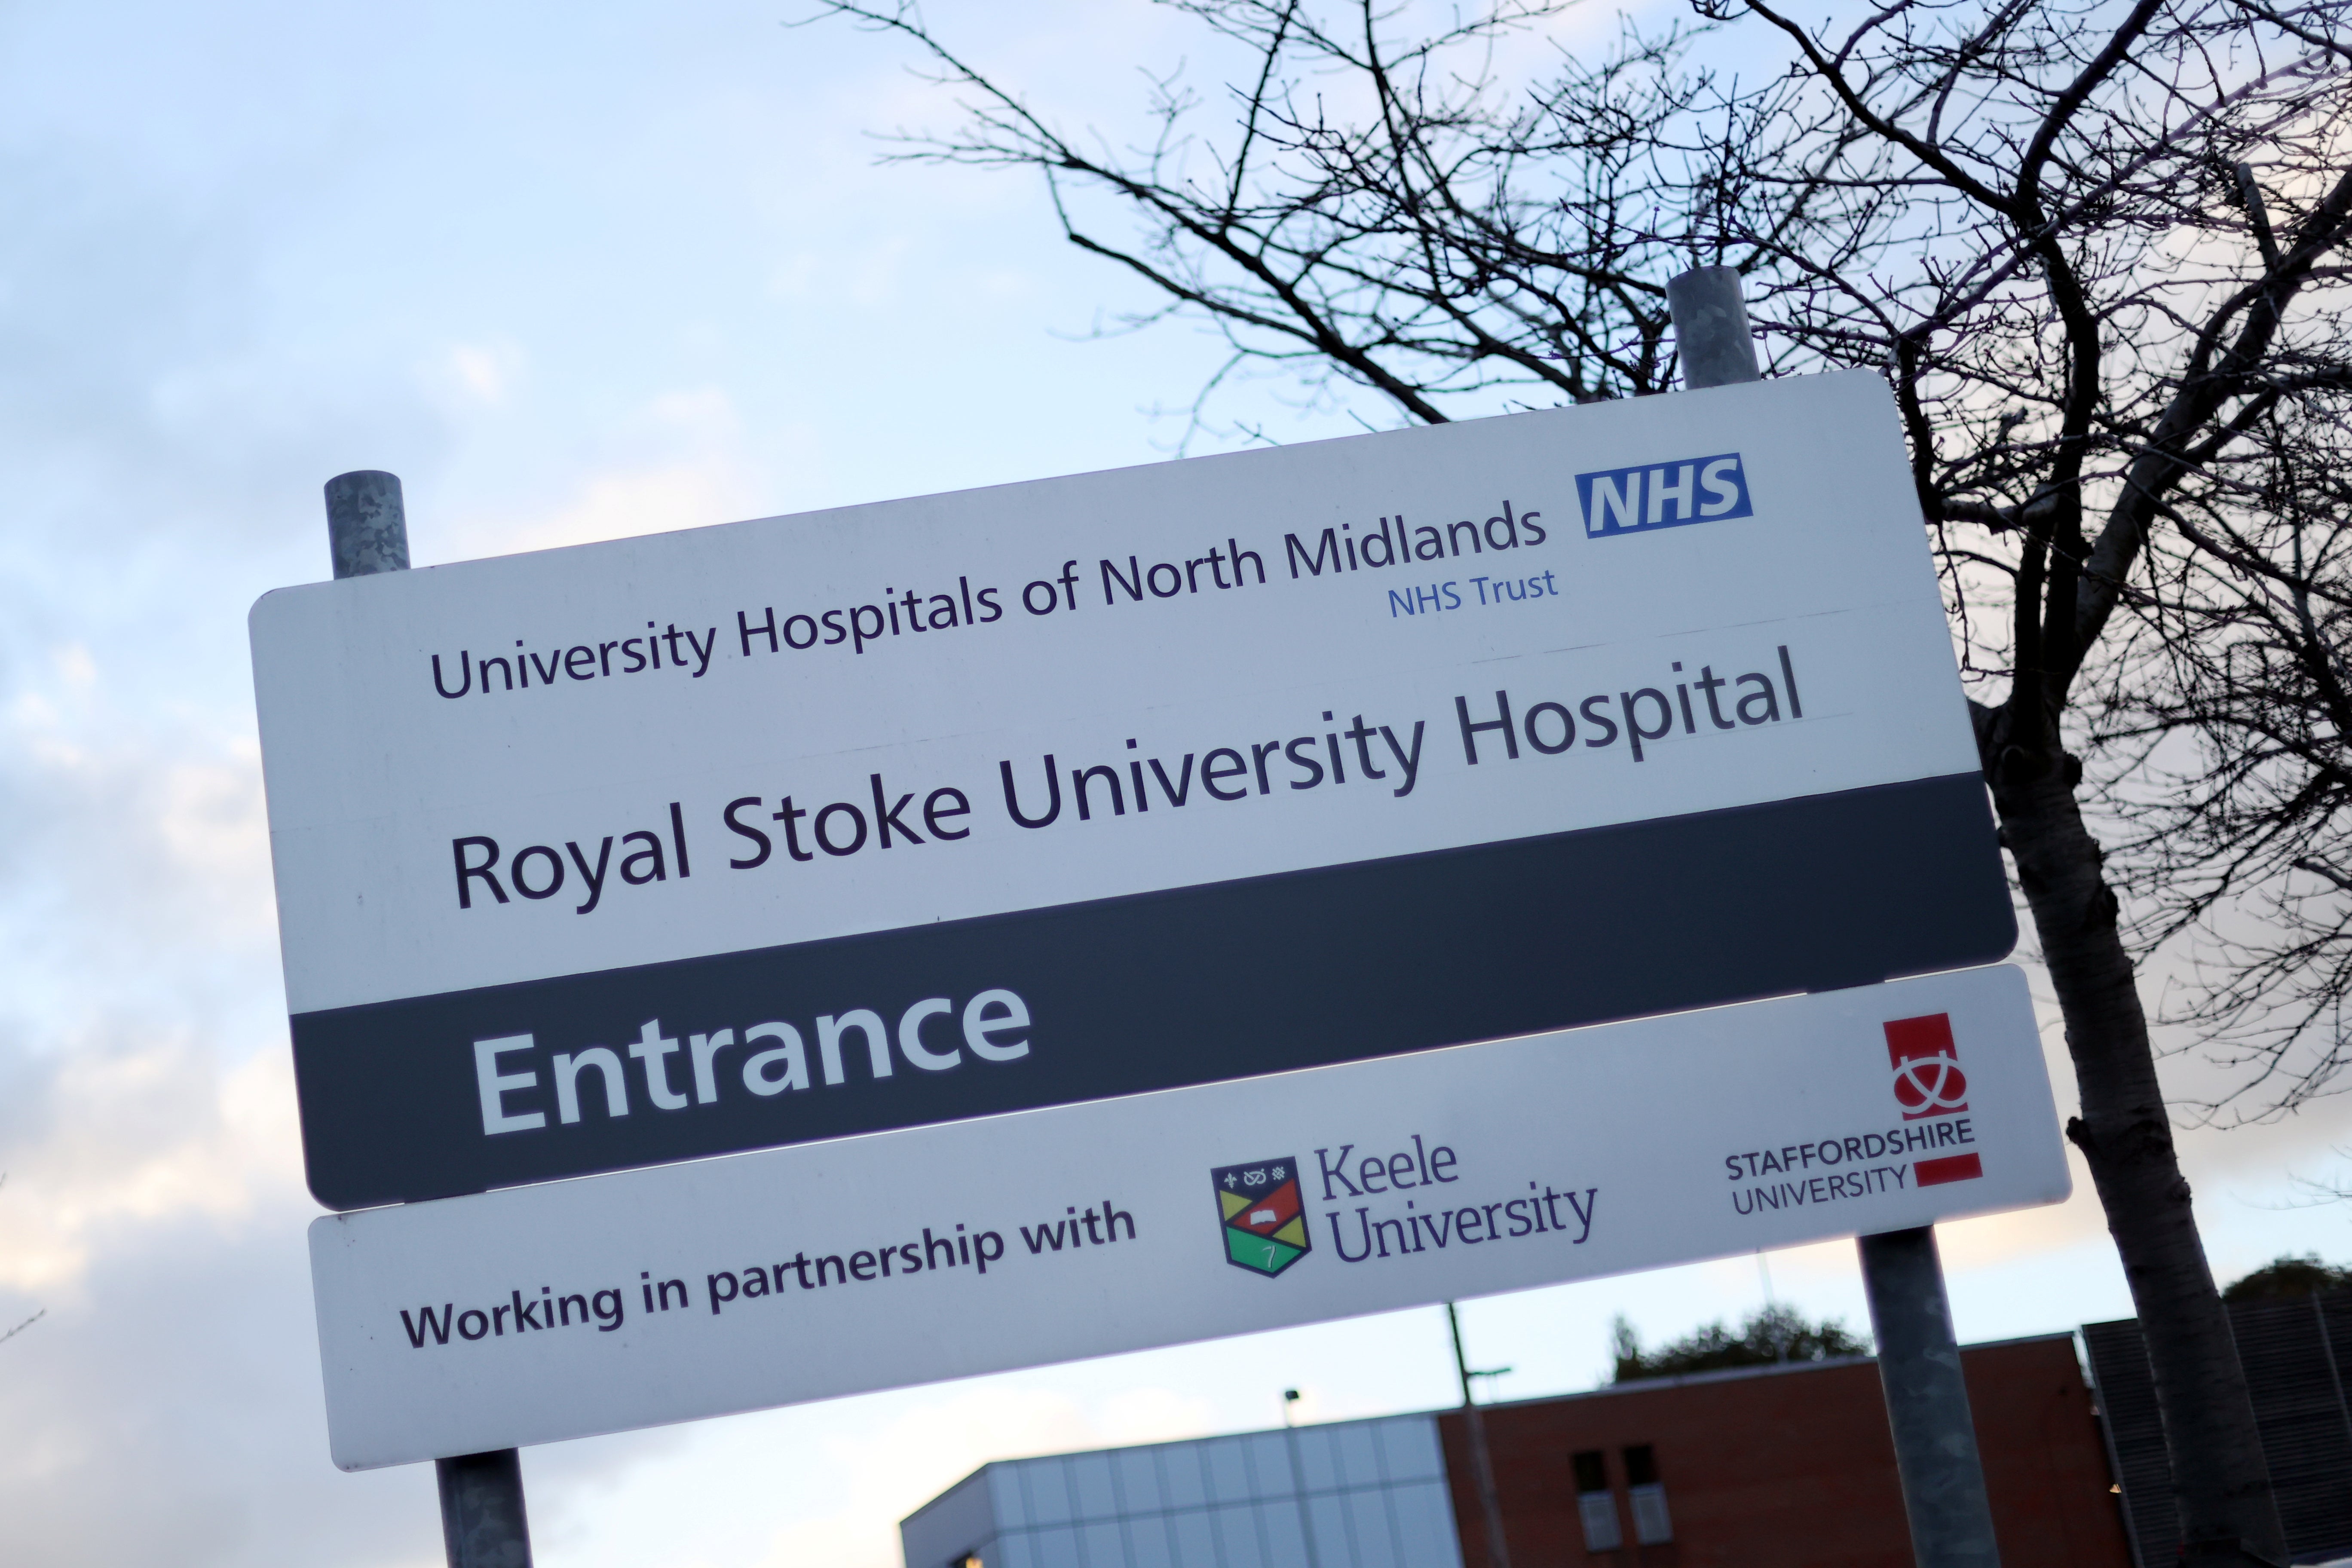 Concerns about the doctor’s conduct at Royal Stoke University Hospital were raised almost four years ago